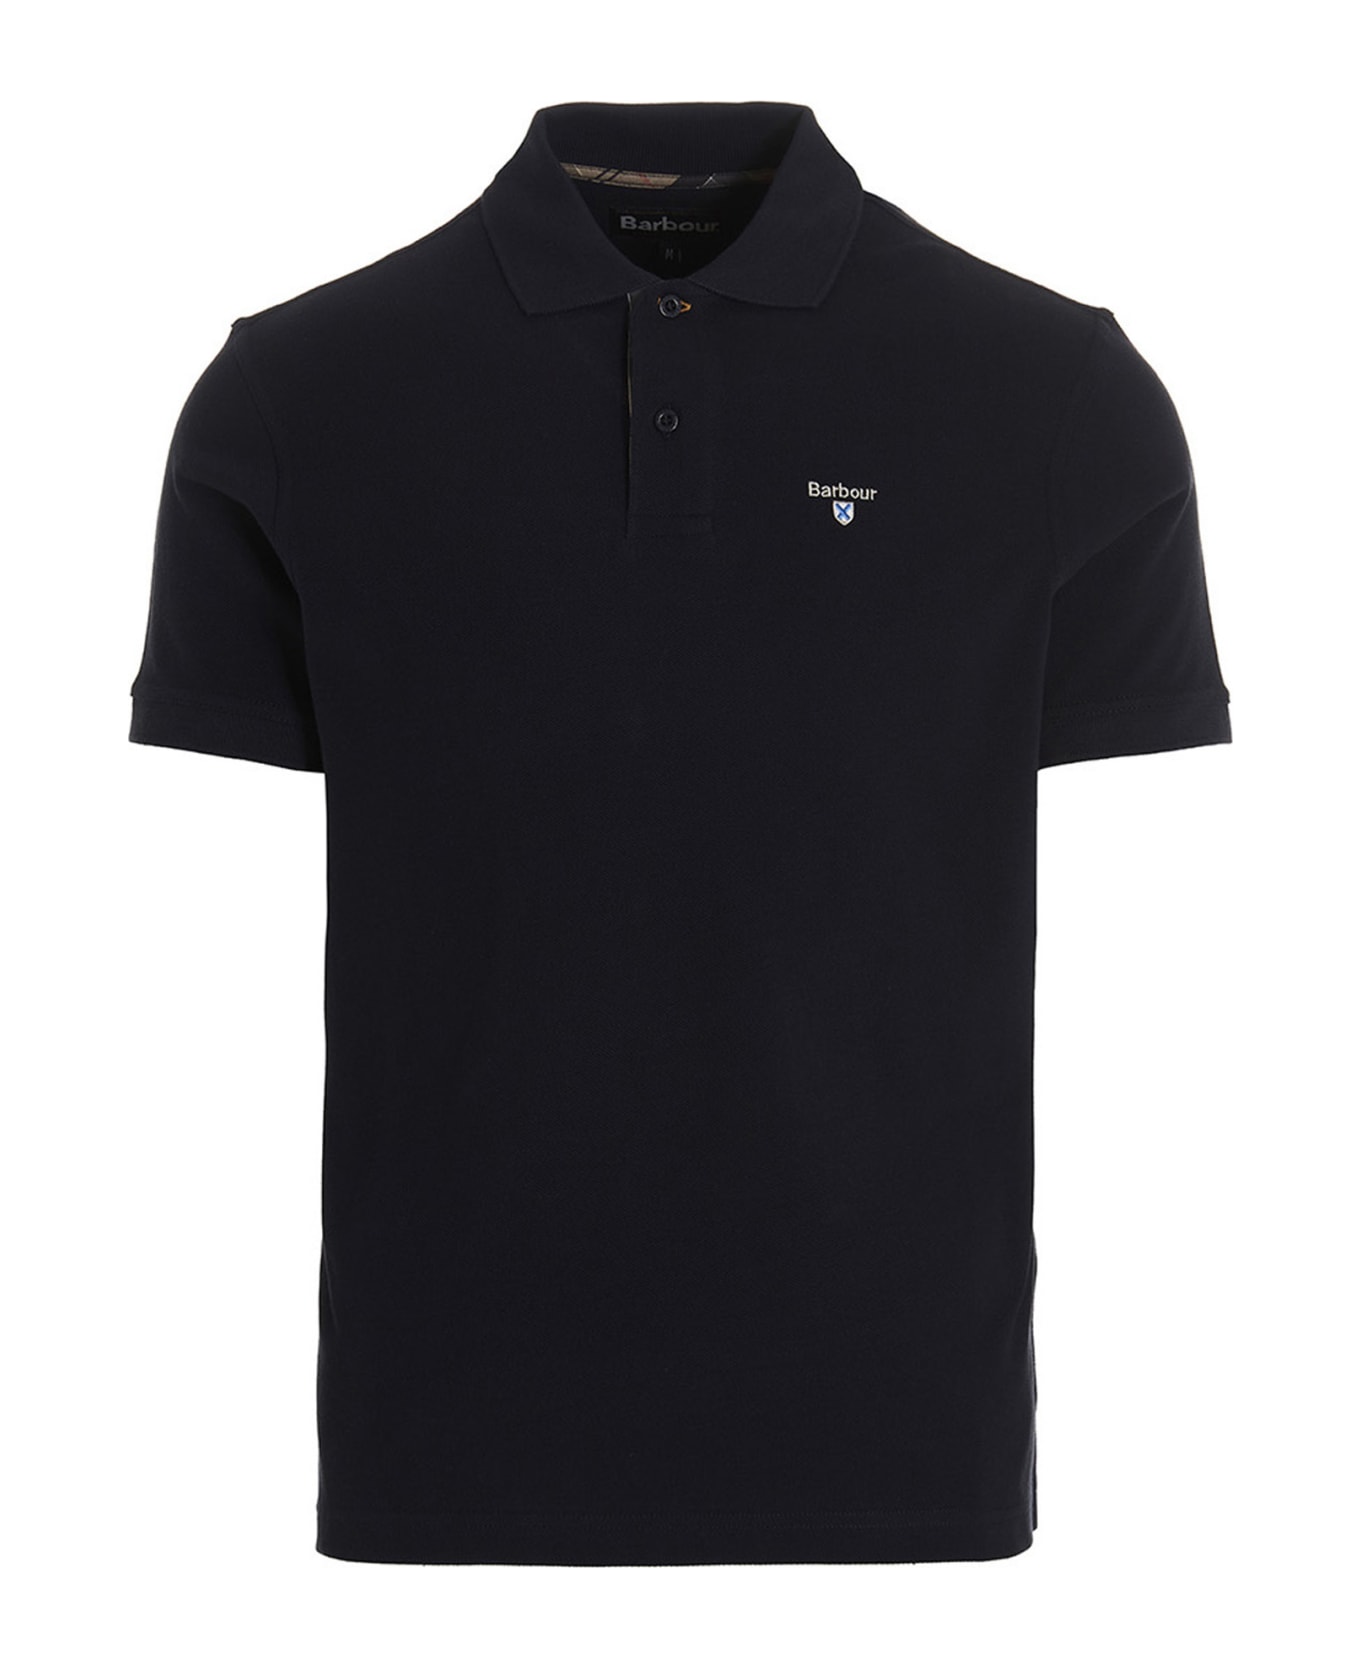 Barbour 'tartan' Polo Shirt - New Navy ポロシャツ